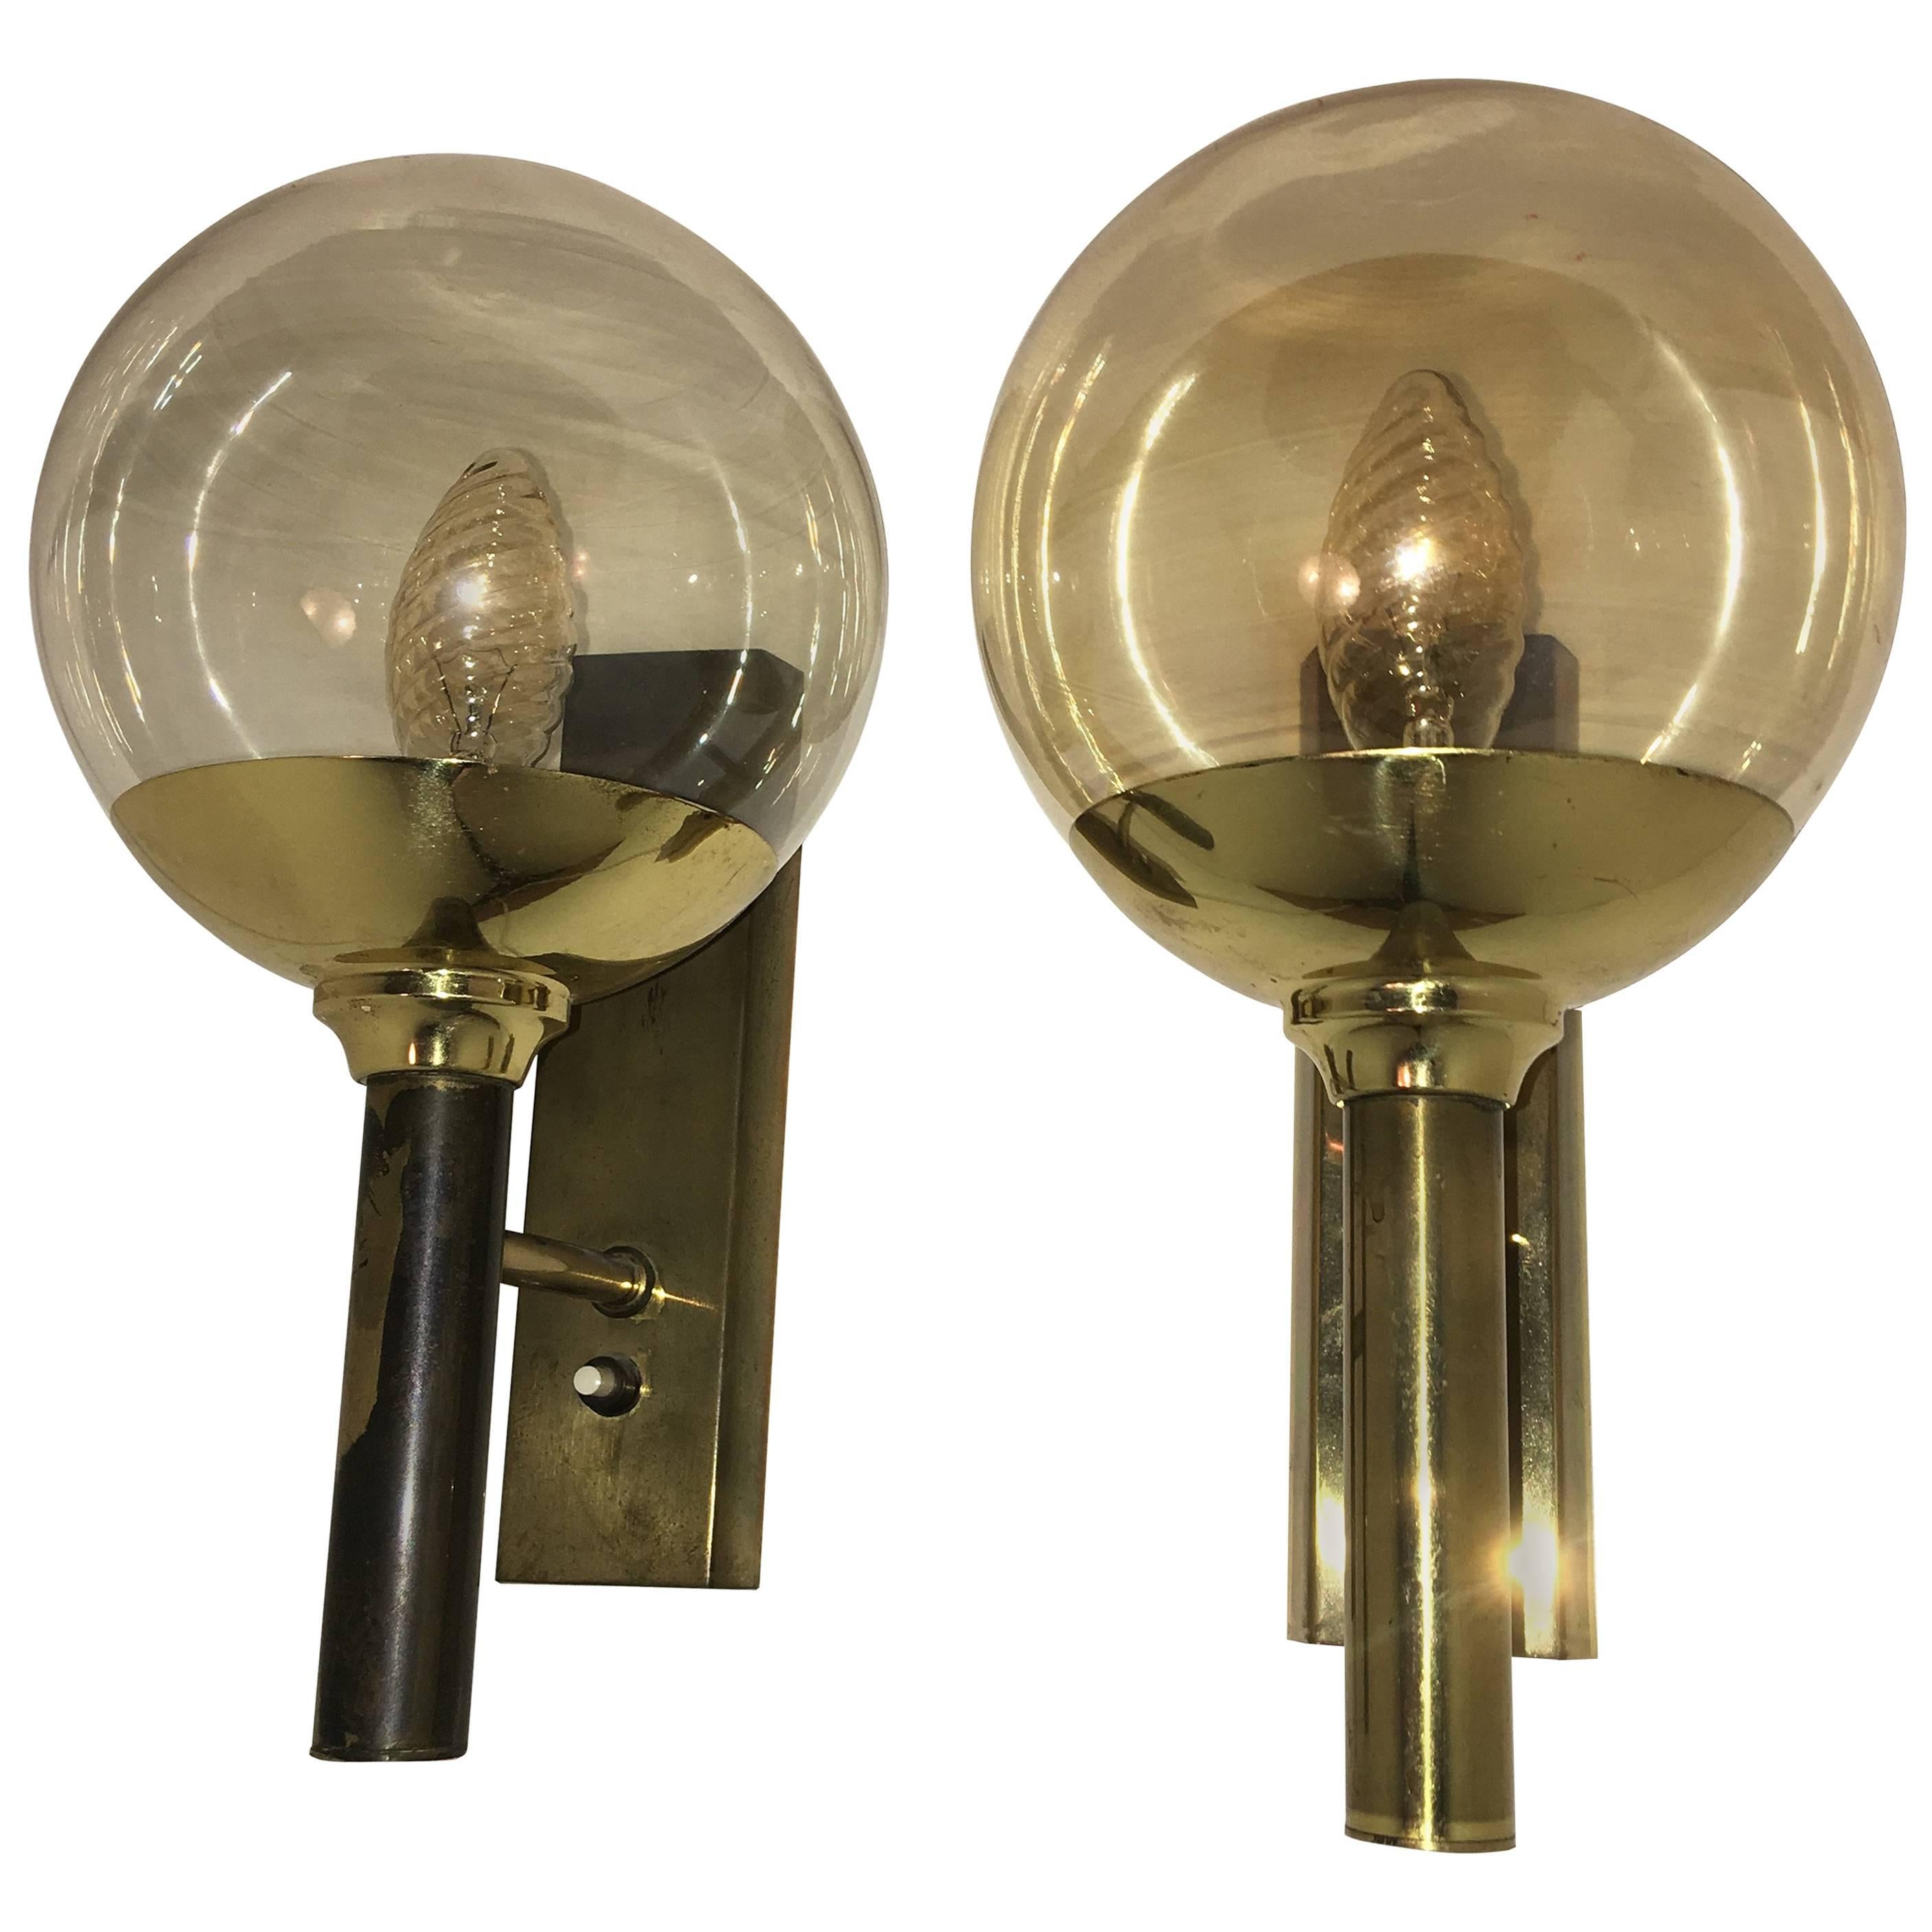 Pair of Svend Mejlstrom Sconces by Mejlstrom Belysning of Norway For Sale